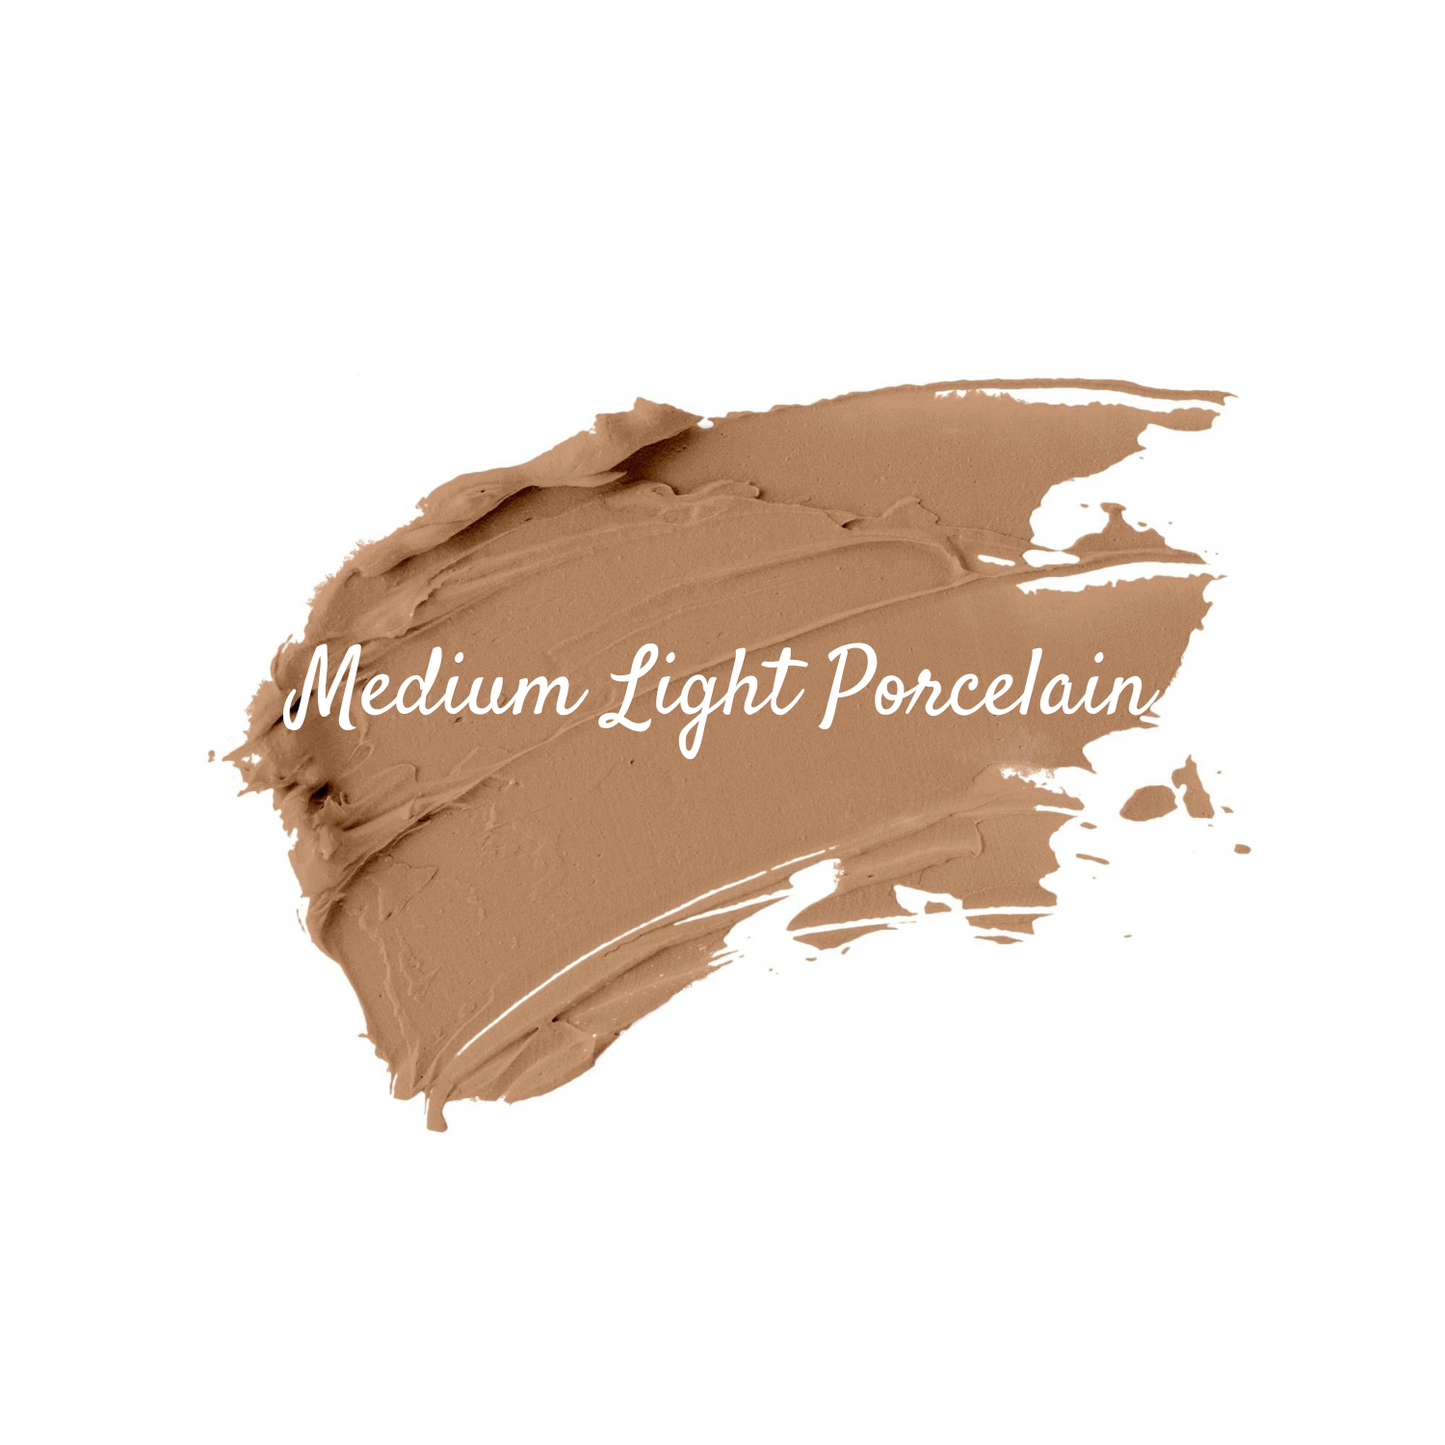 Liquid Foundation HD Full Coverage - Natural Smooth Finish